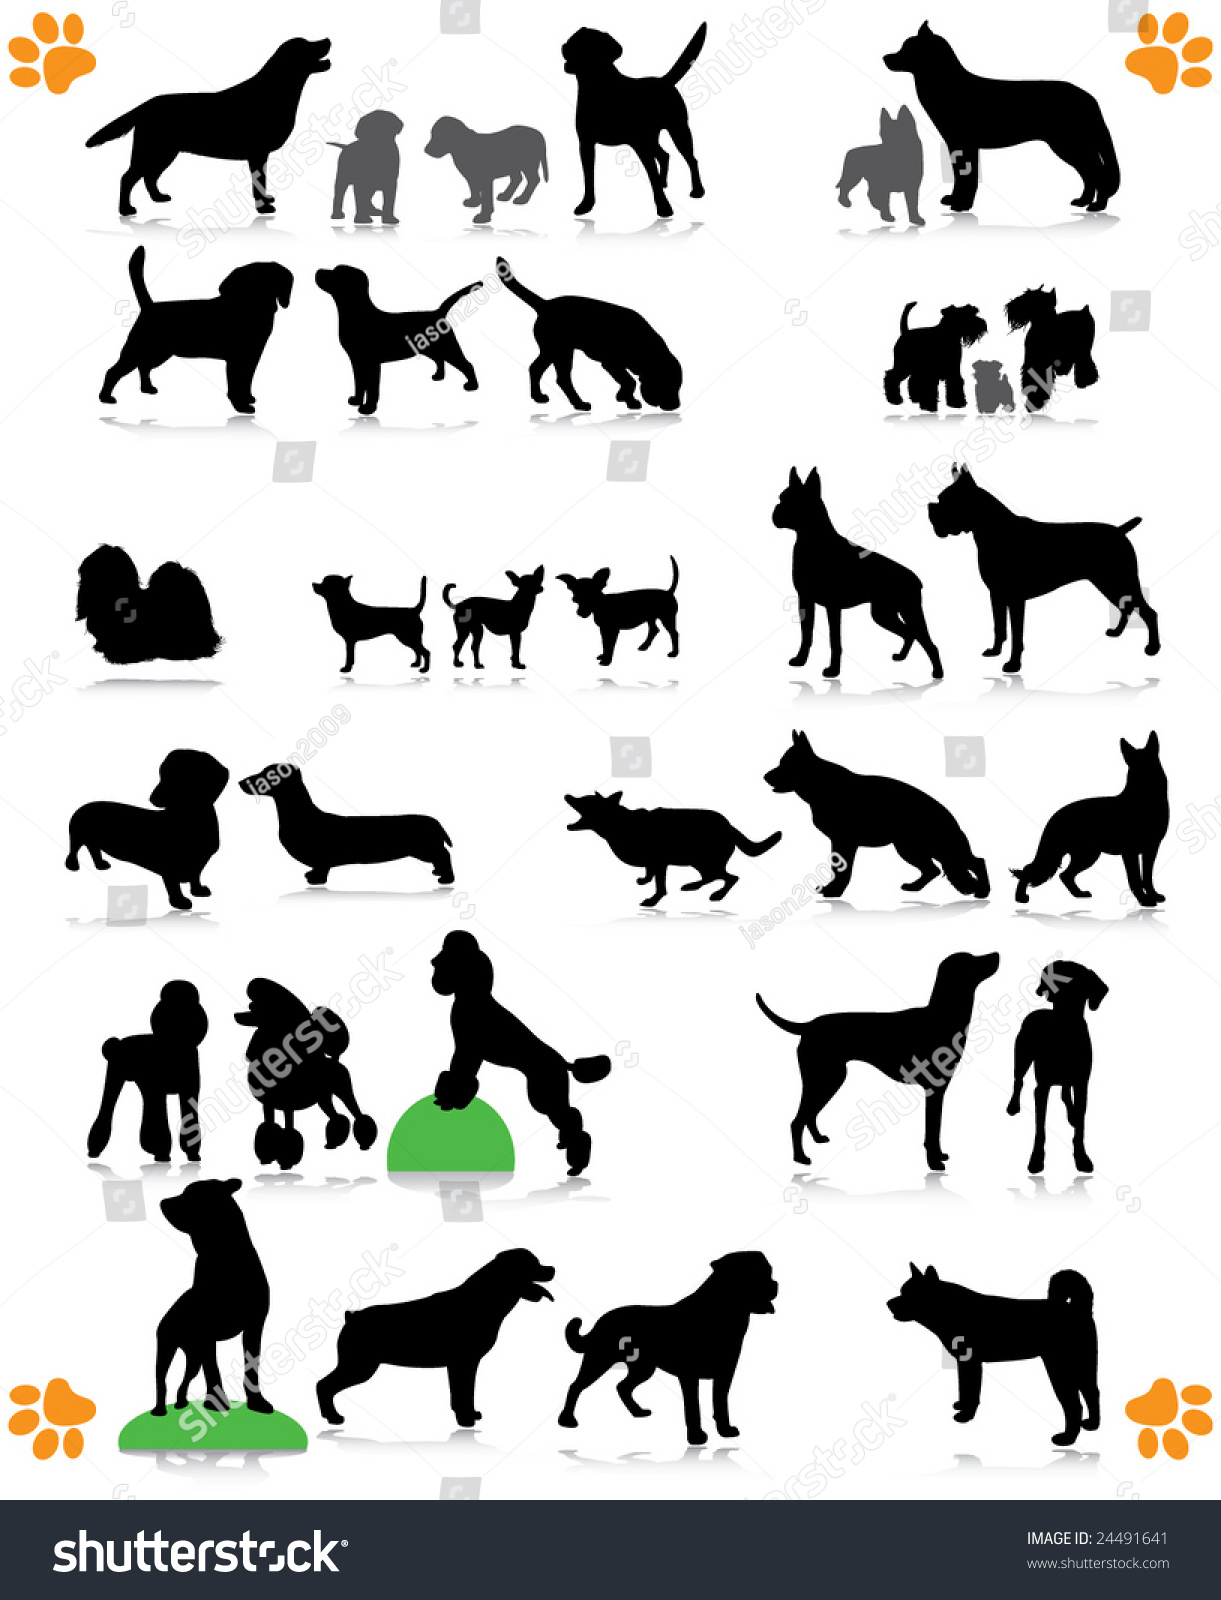 SVG of dogs silhouette part 2 of 3:dog's breed svg